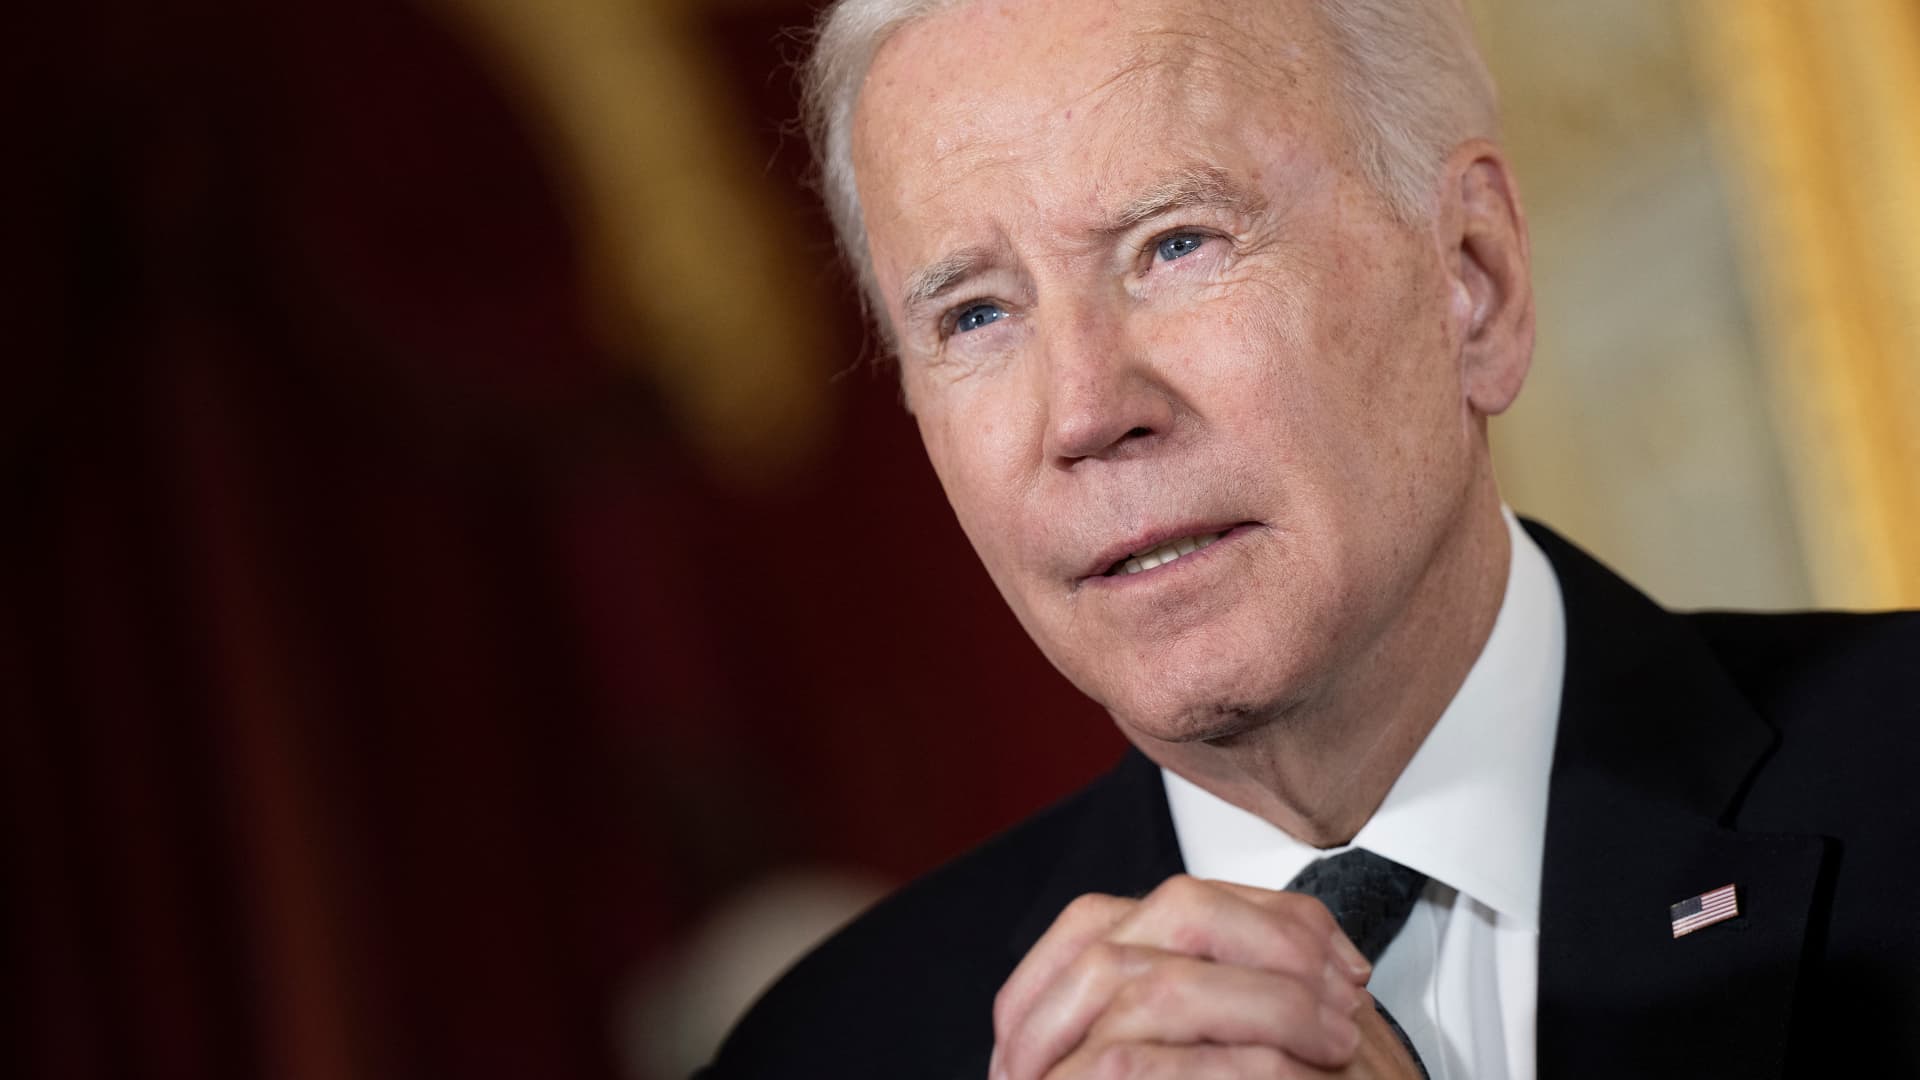 Biden introduces administration's plans to increase competition across industries